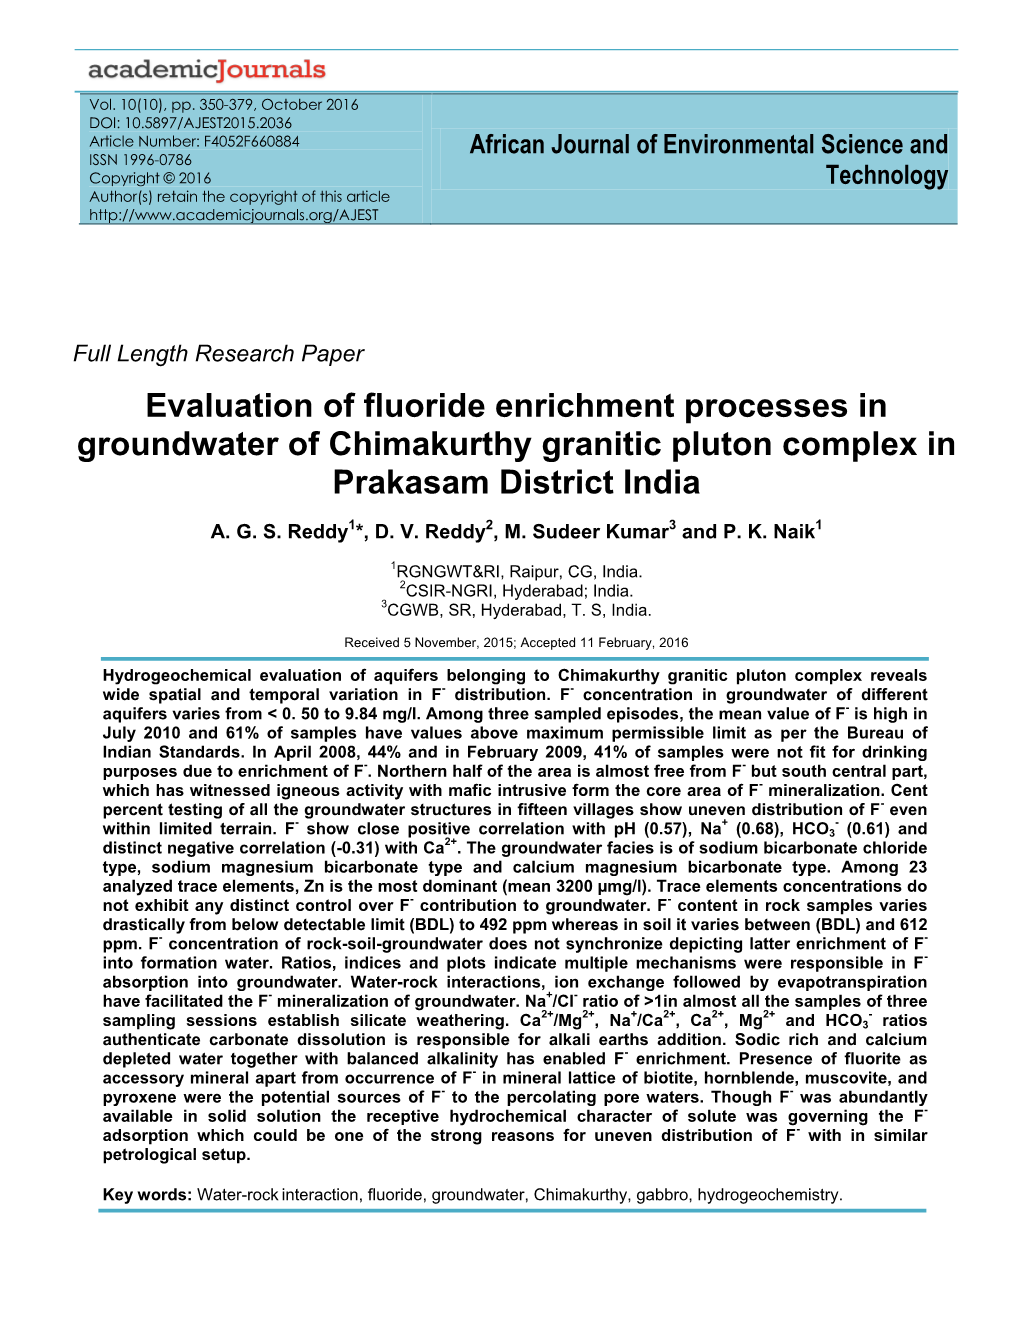 Evaluation of Fluoride Enrichment Processes in Groundwater of Chimakurthy Granitic Pluton Complex in Prakasam District India